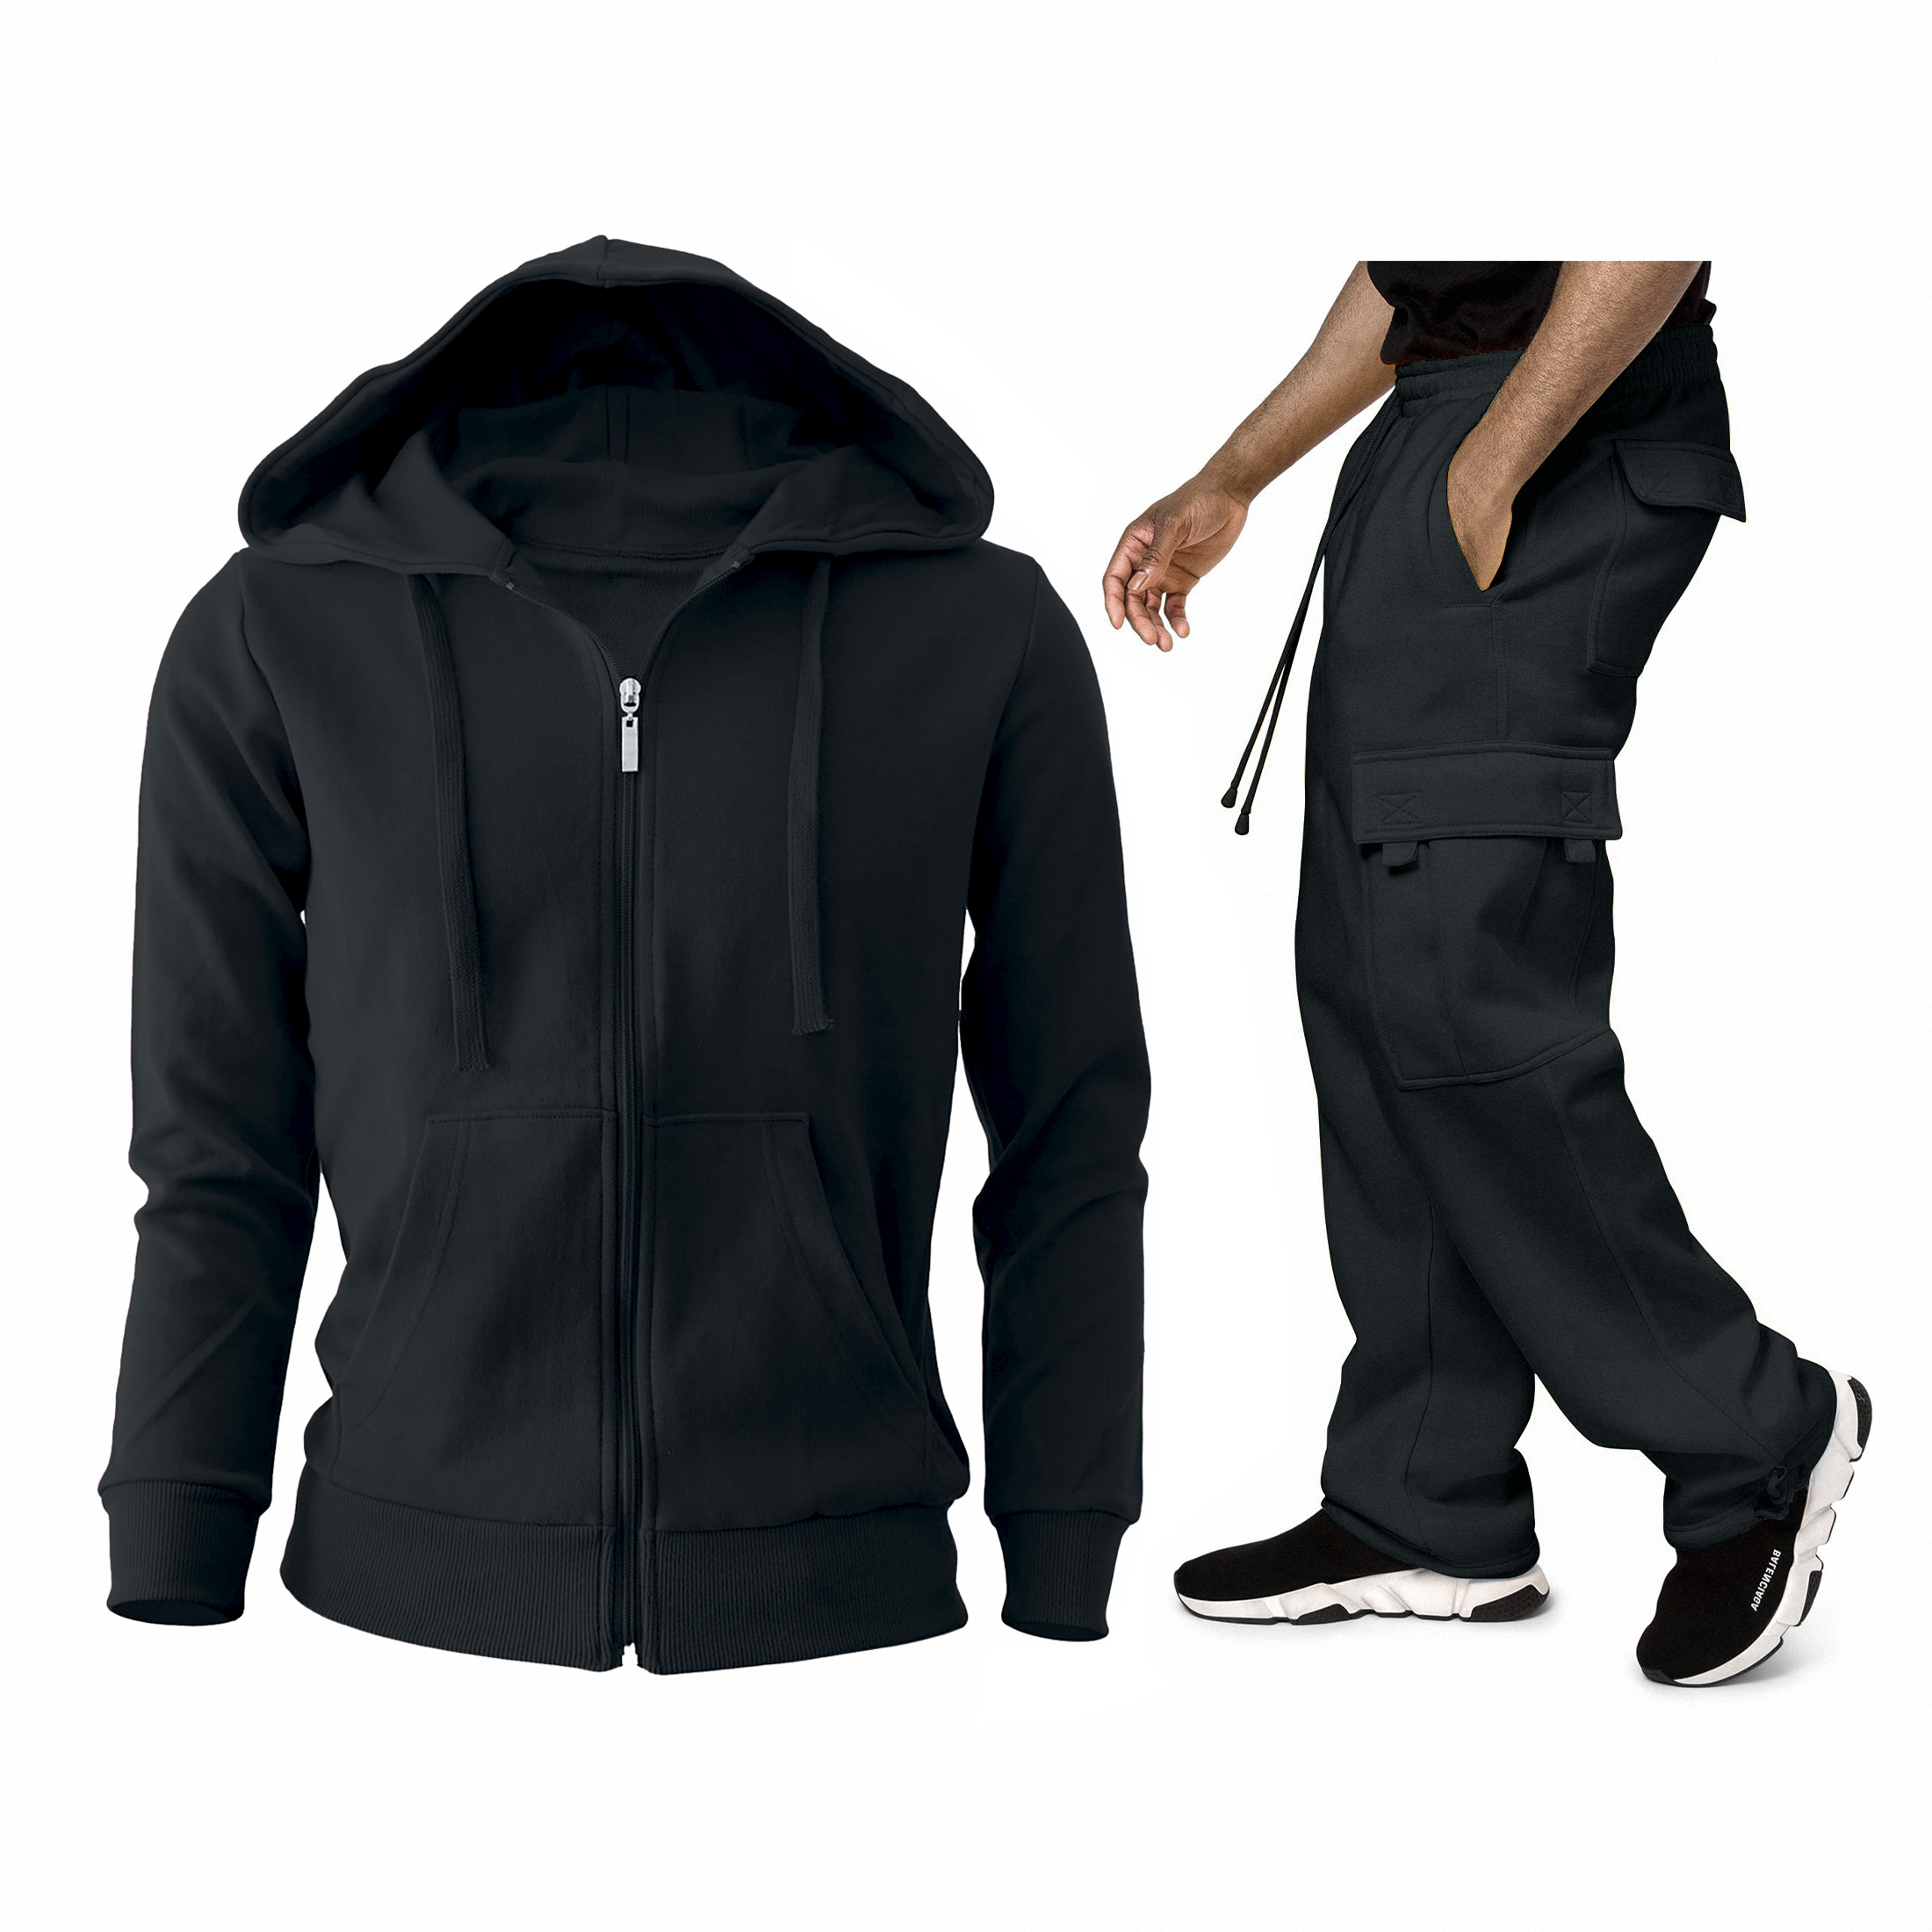 Men's Active Full Zip Up Cargo Athletic Tracksuit - Black, X-Large